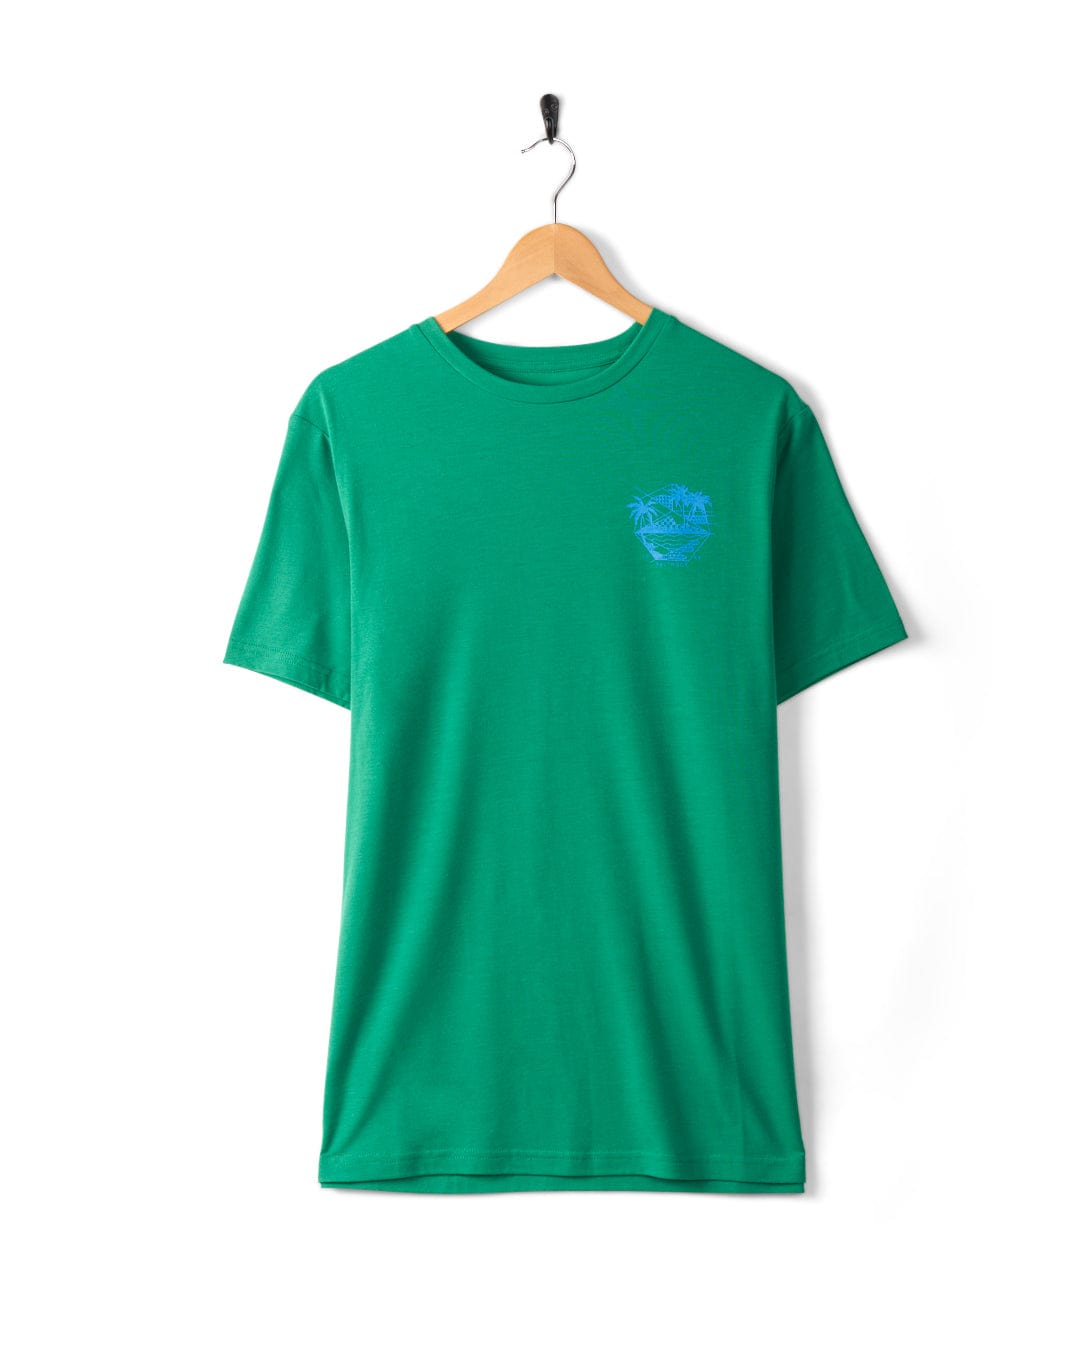 A Geo Palms Solid - Mens Recycled Hybrid T-Shirt - Green by Saltrock, made from recycled material with a small blue palm tree graphic on the left chest, hanging on a wooden hanger against a white background.